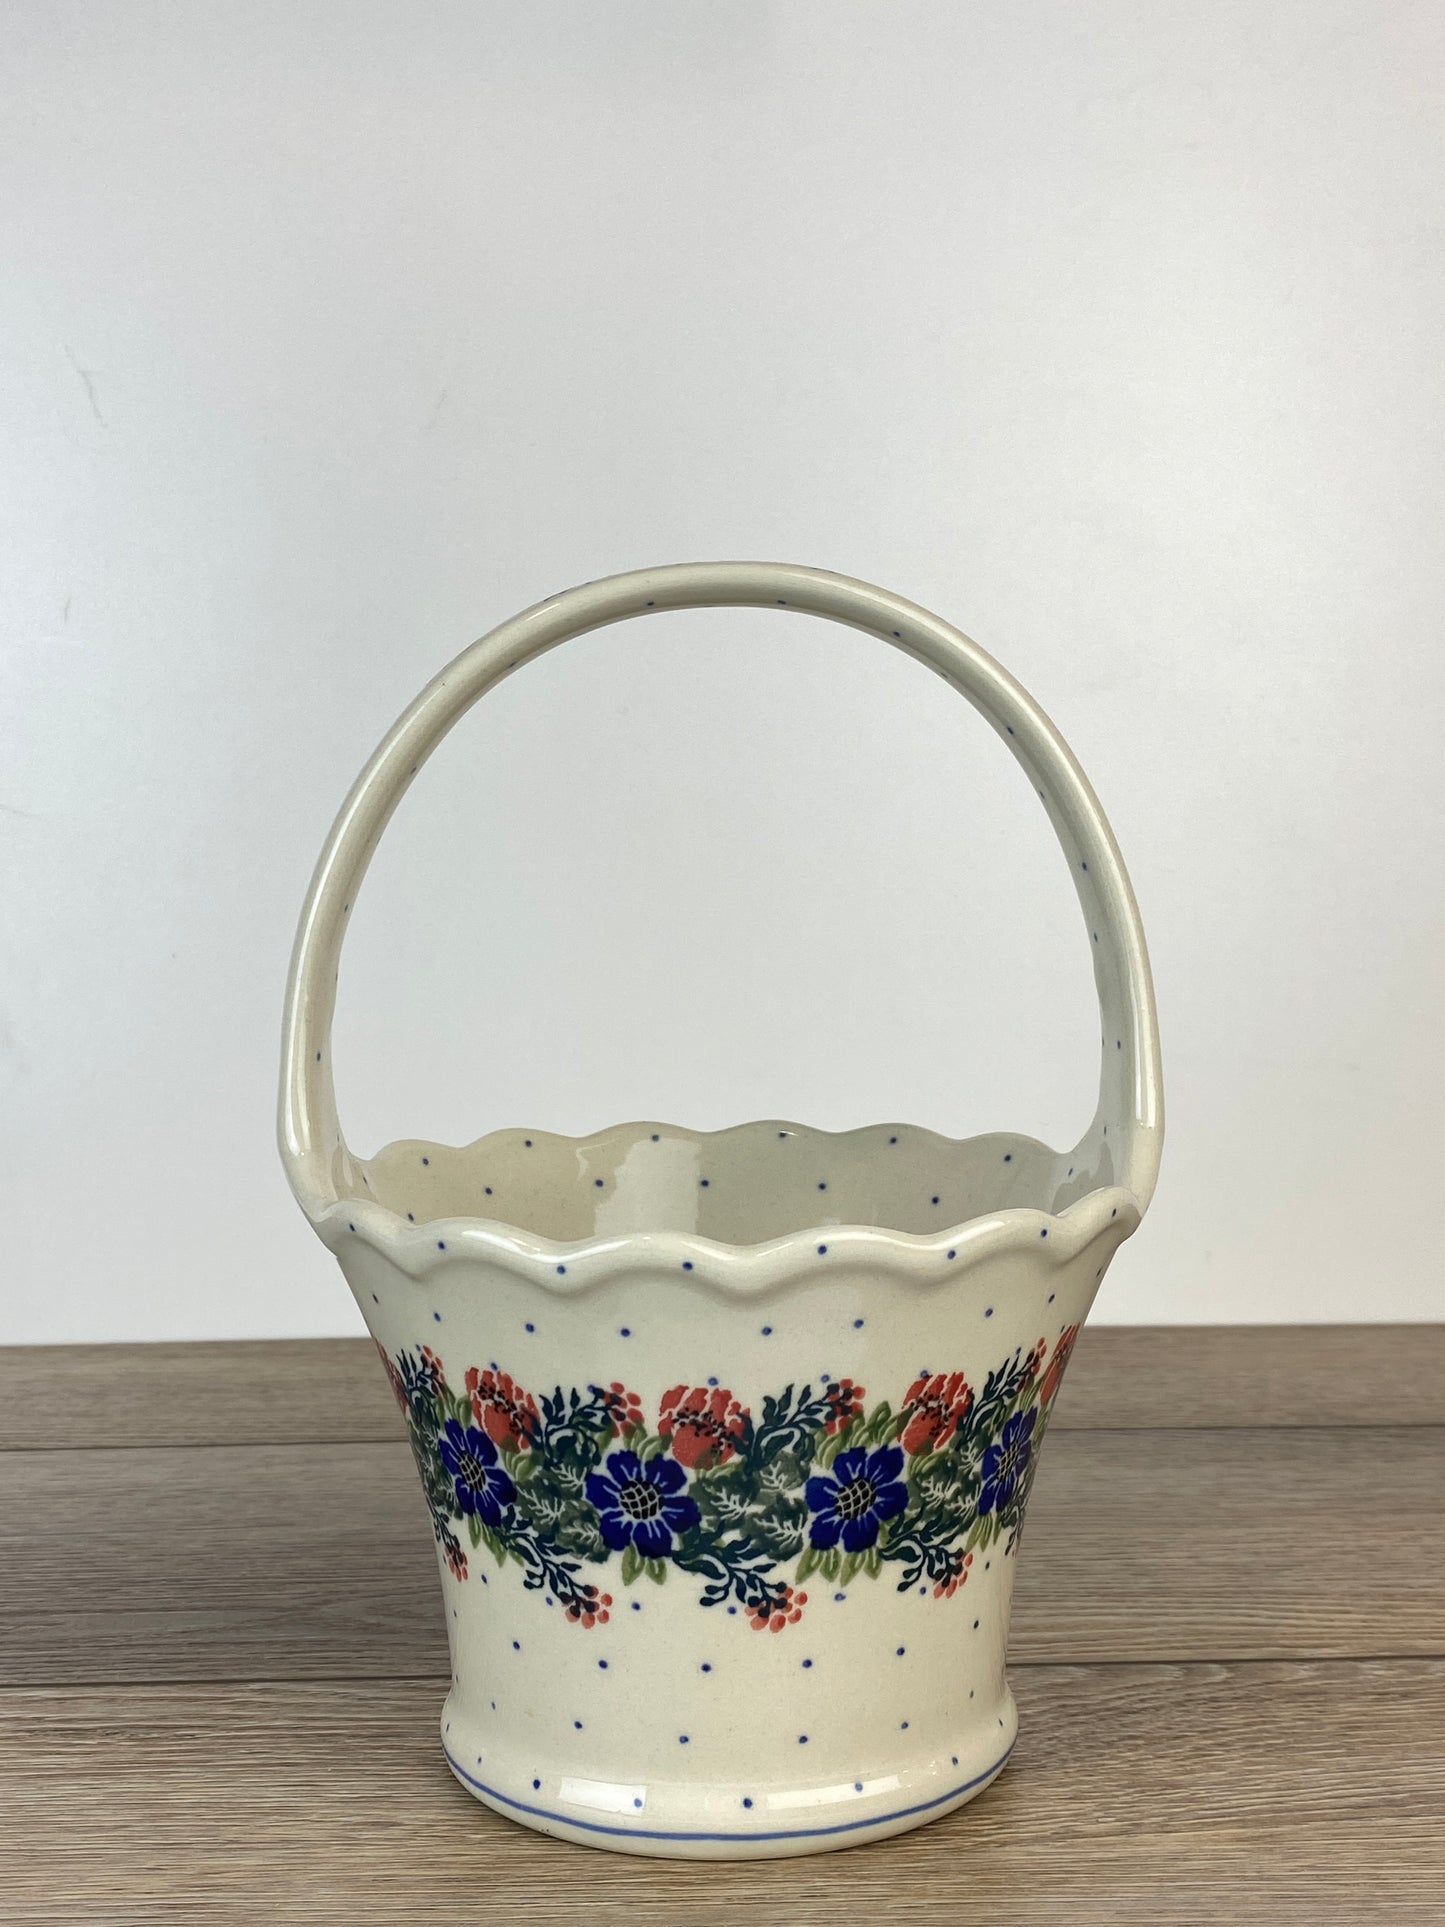 Basket with Handle - Shape A31 - Pattern 1535